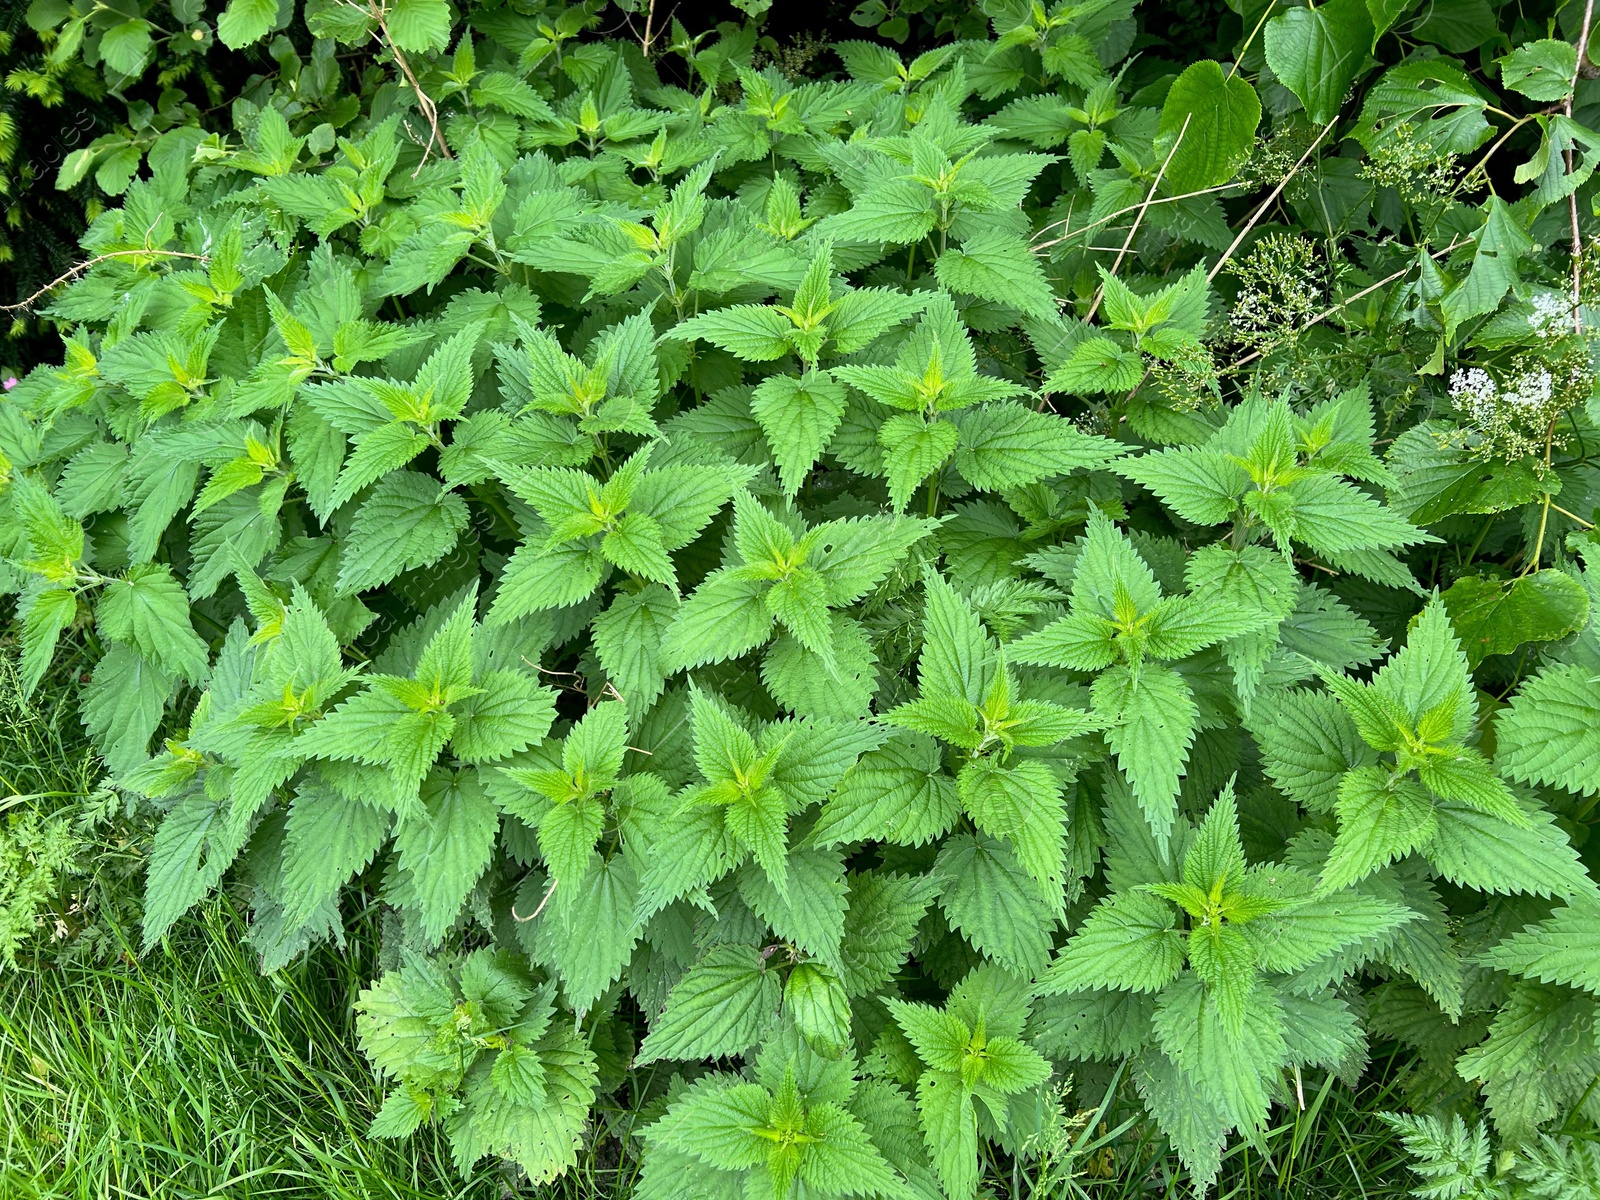 Photo of Nettle plant with green leaves growing outdoors